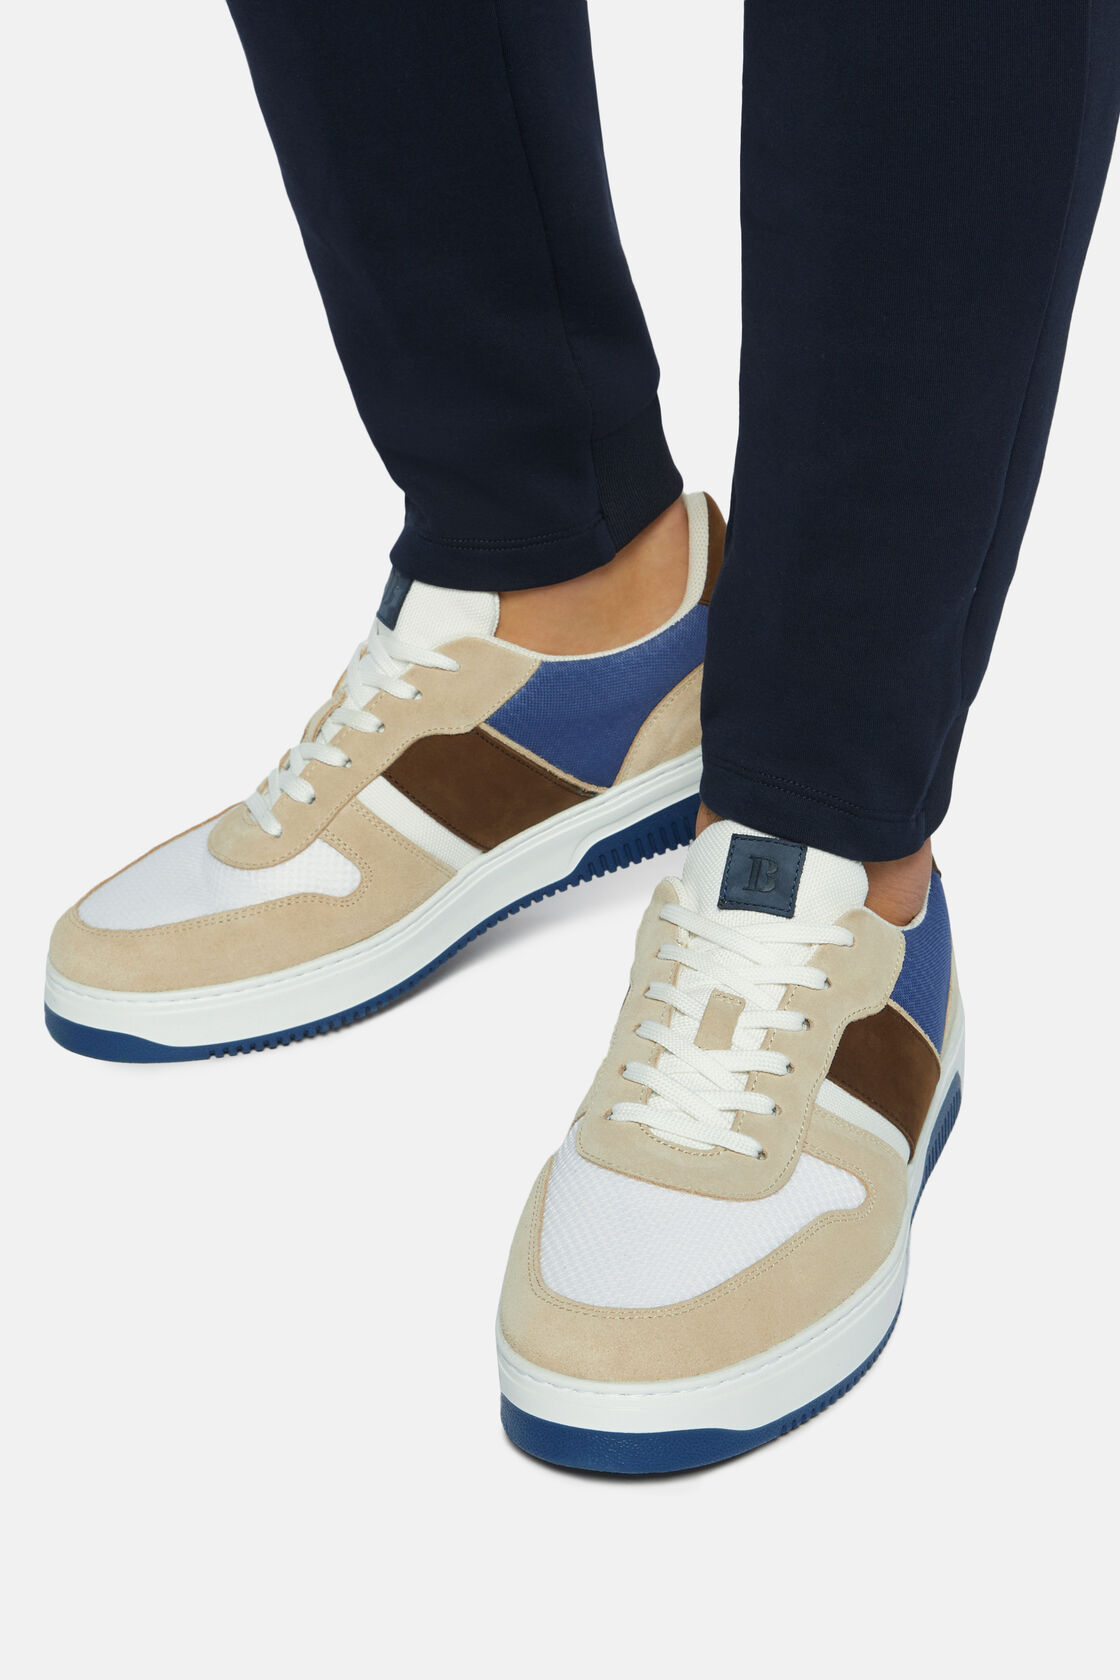 Beige Trainers in Leather and Technical Fabric, Light Blu, hi-res